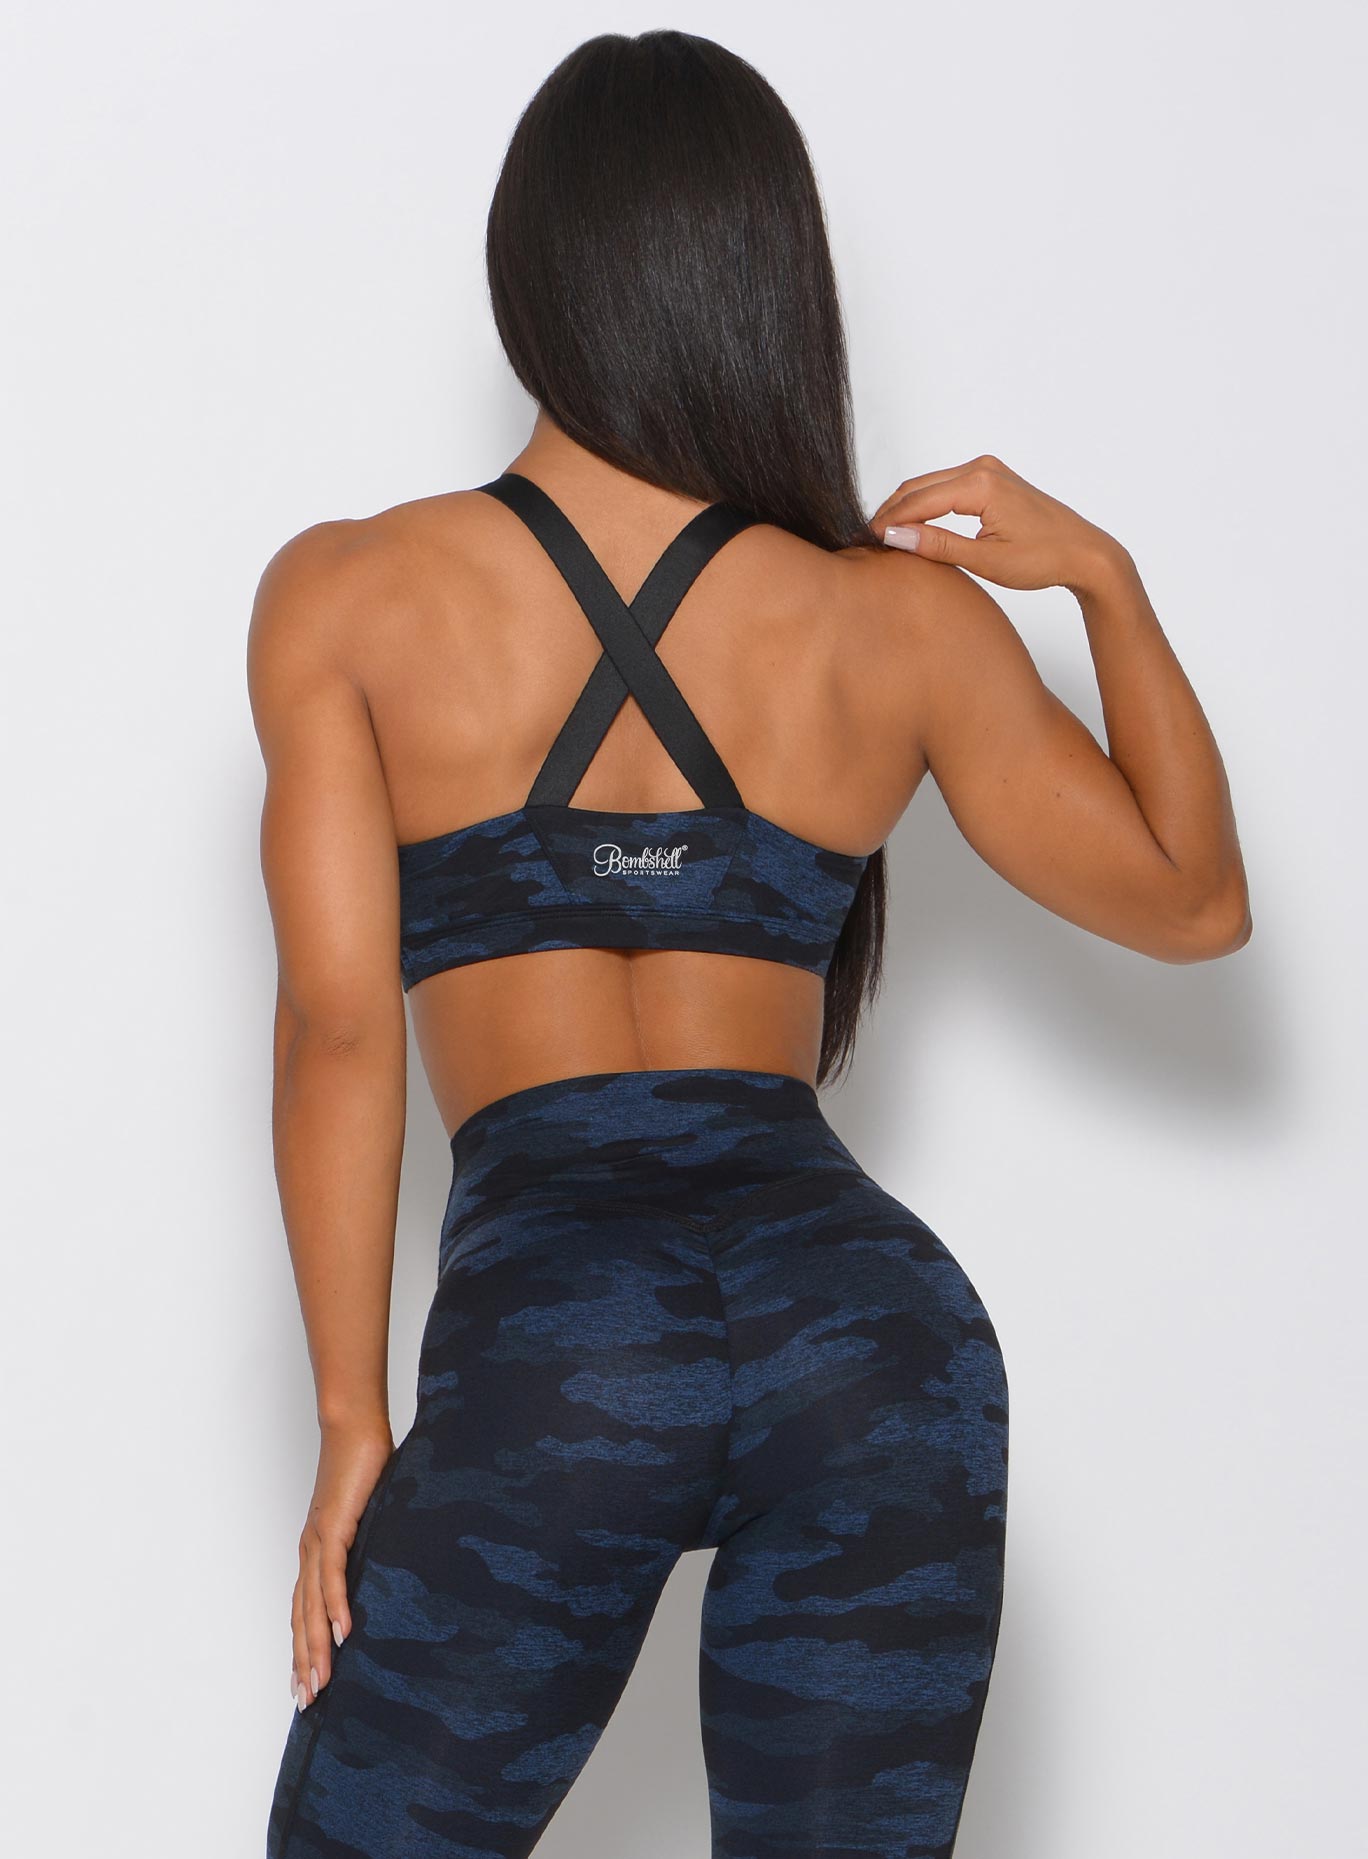 Back view of the model in the blue black camo sports bra 